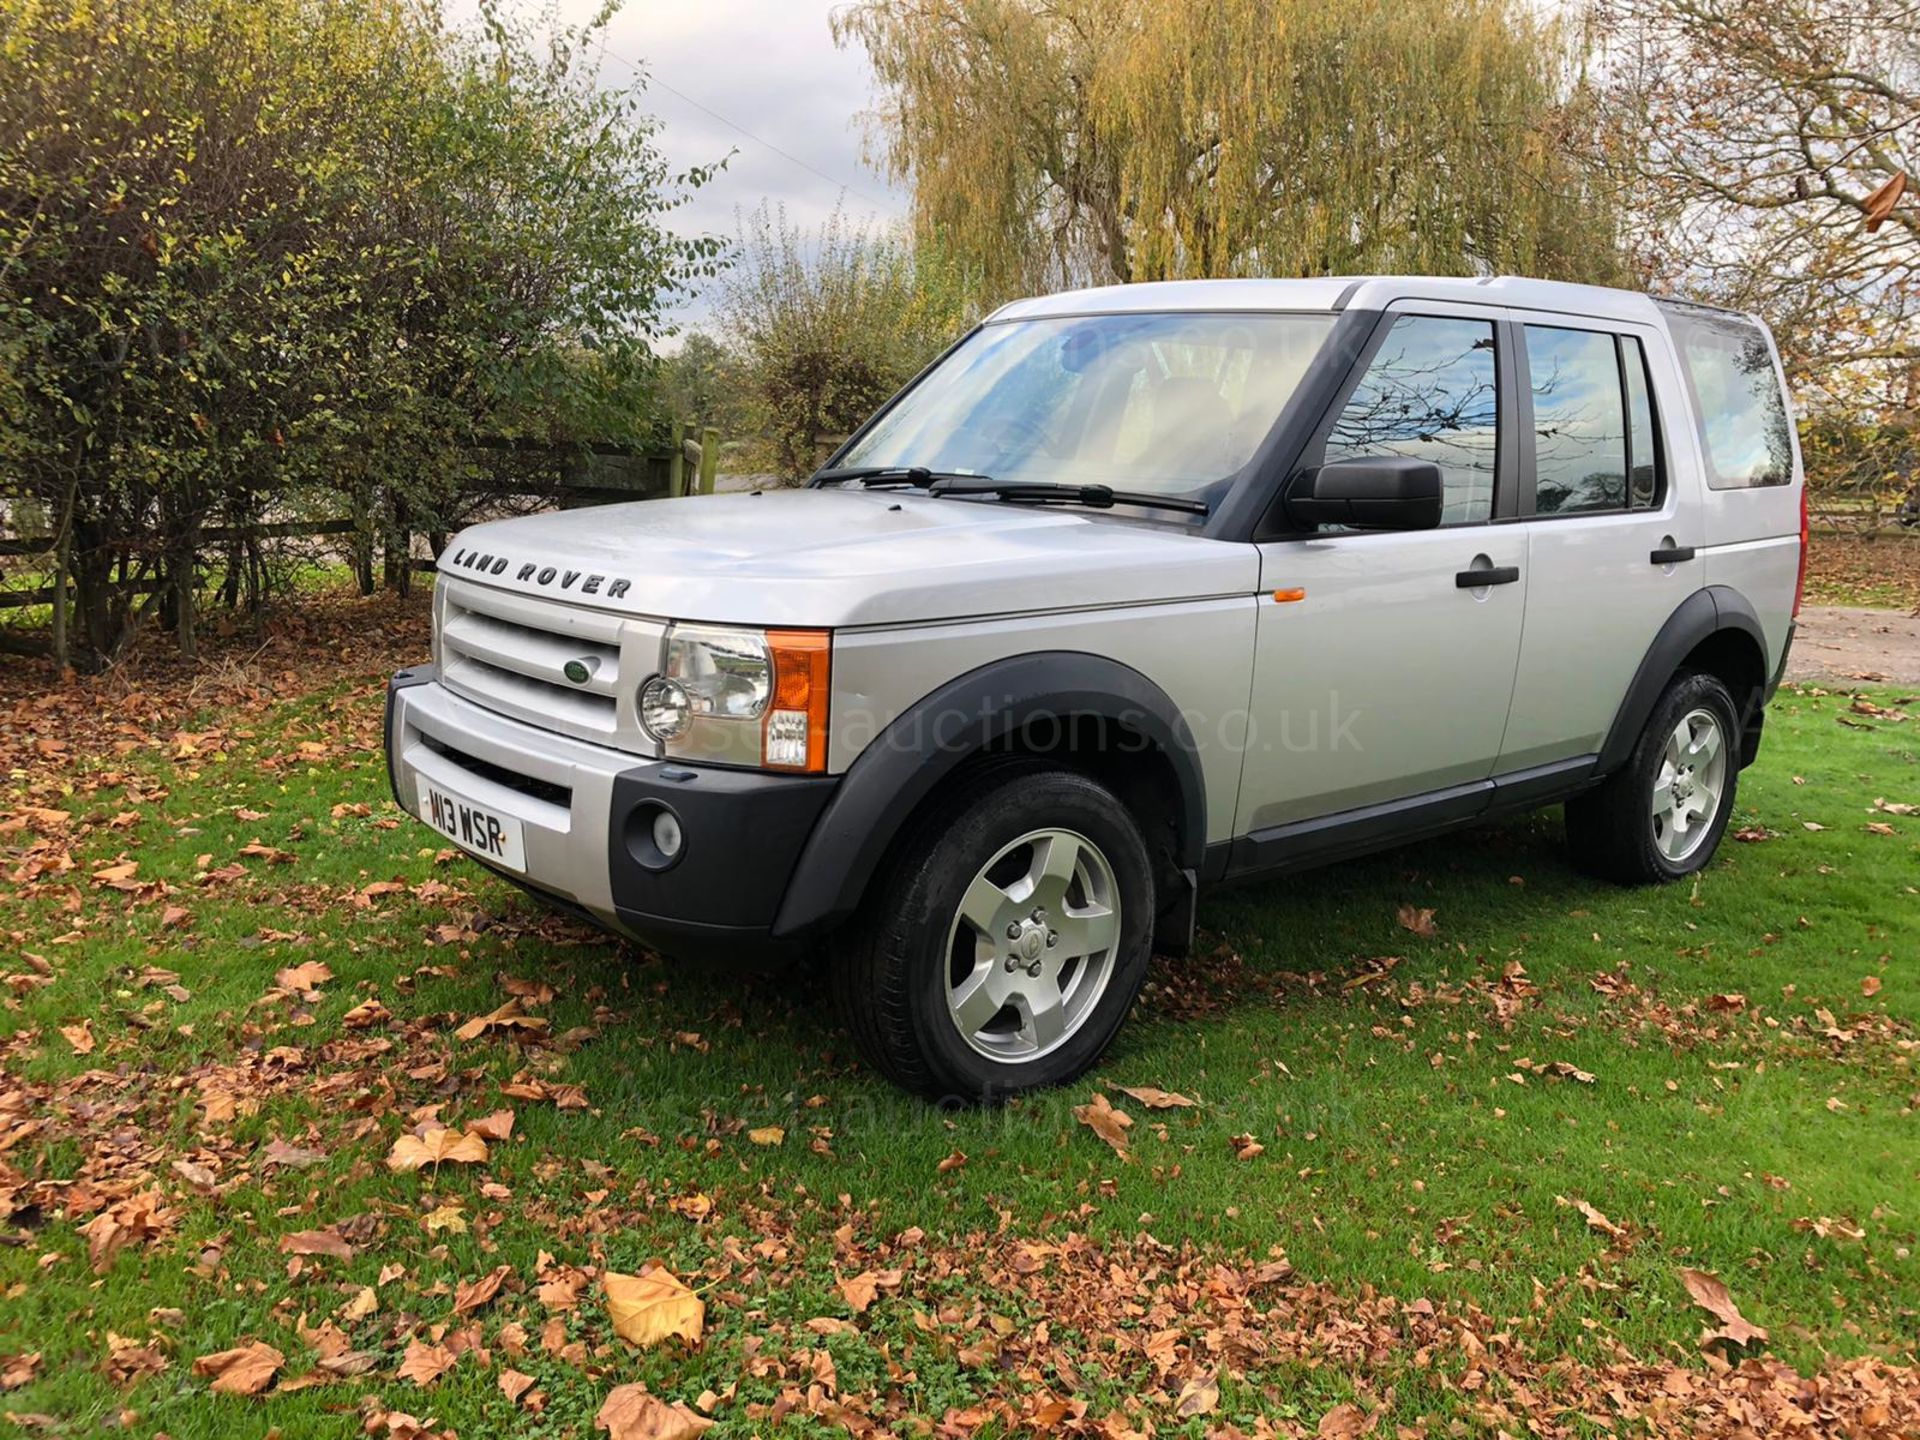 2005 LAND ROVER DISCOVERY 3 TDV6 S AUTO SILVER ESTATE, 146,941 MILES *NO VAT* - Image 3 of 17